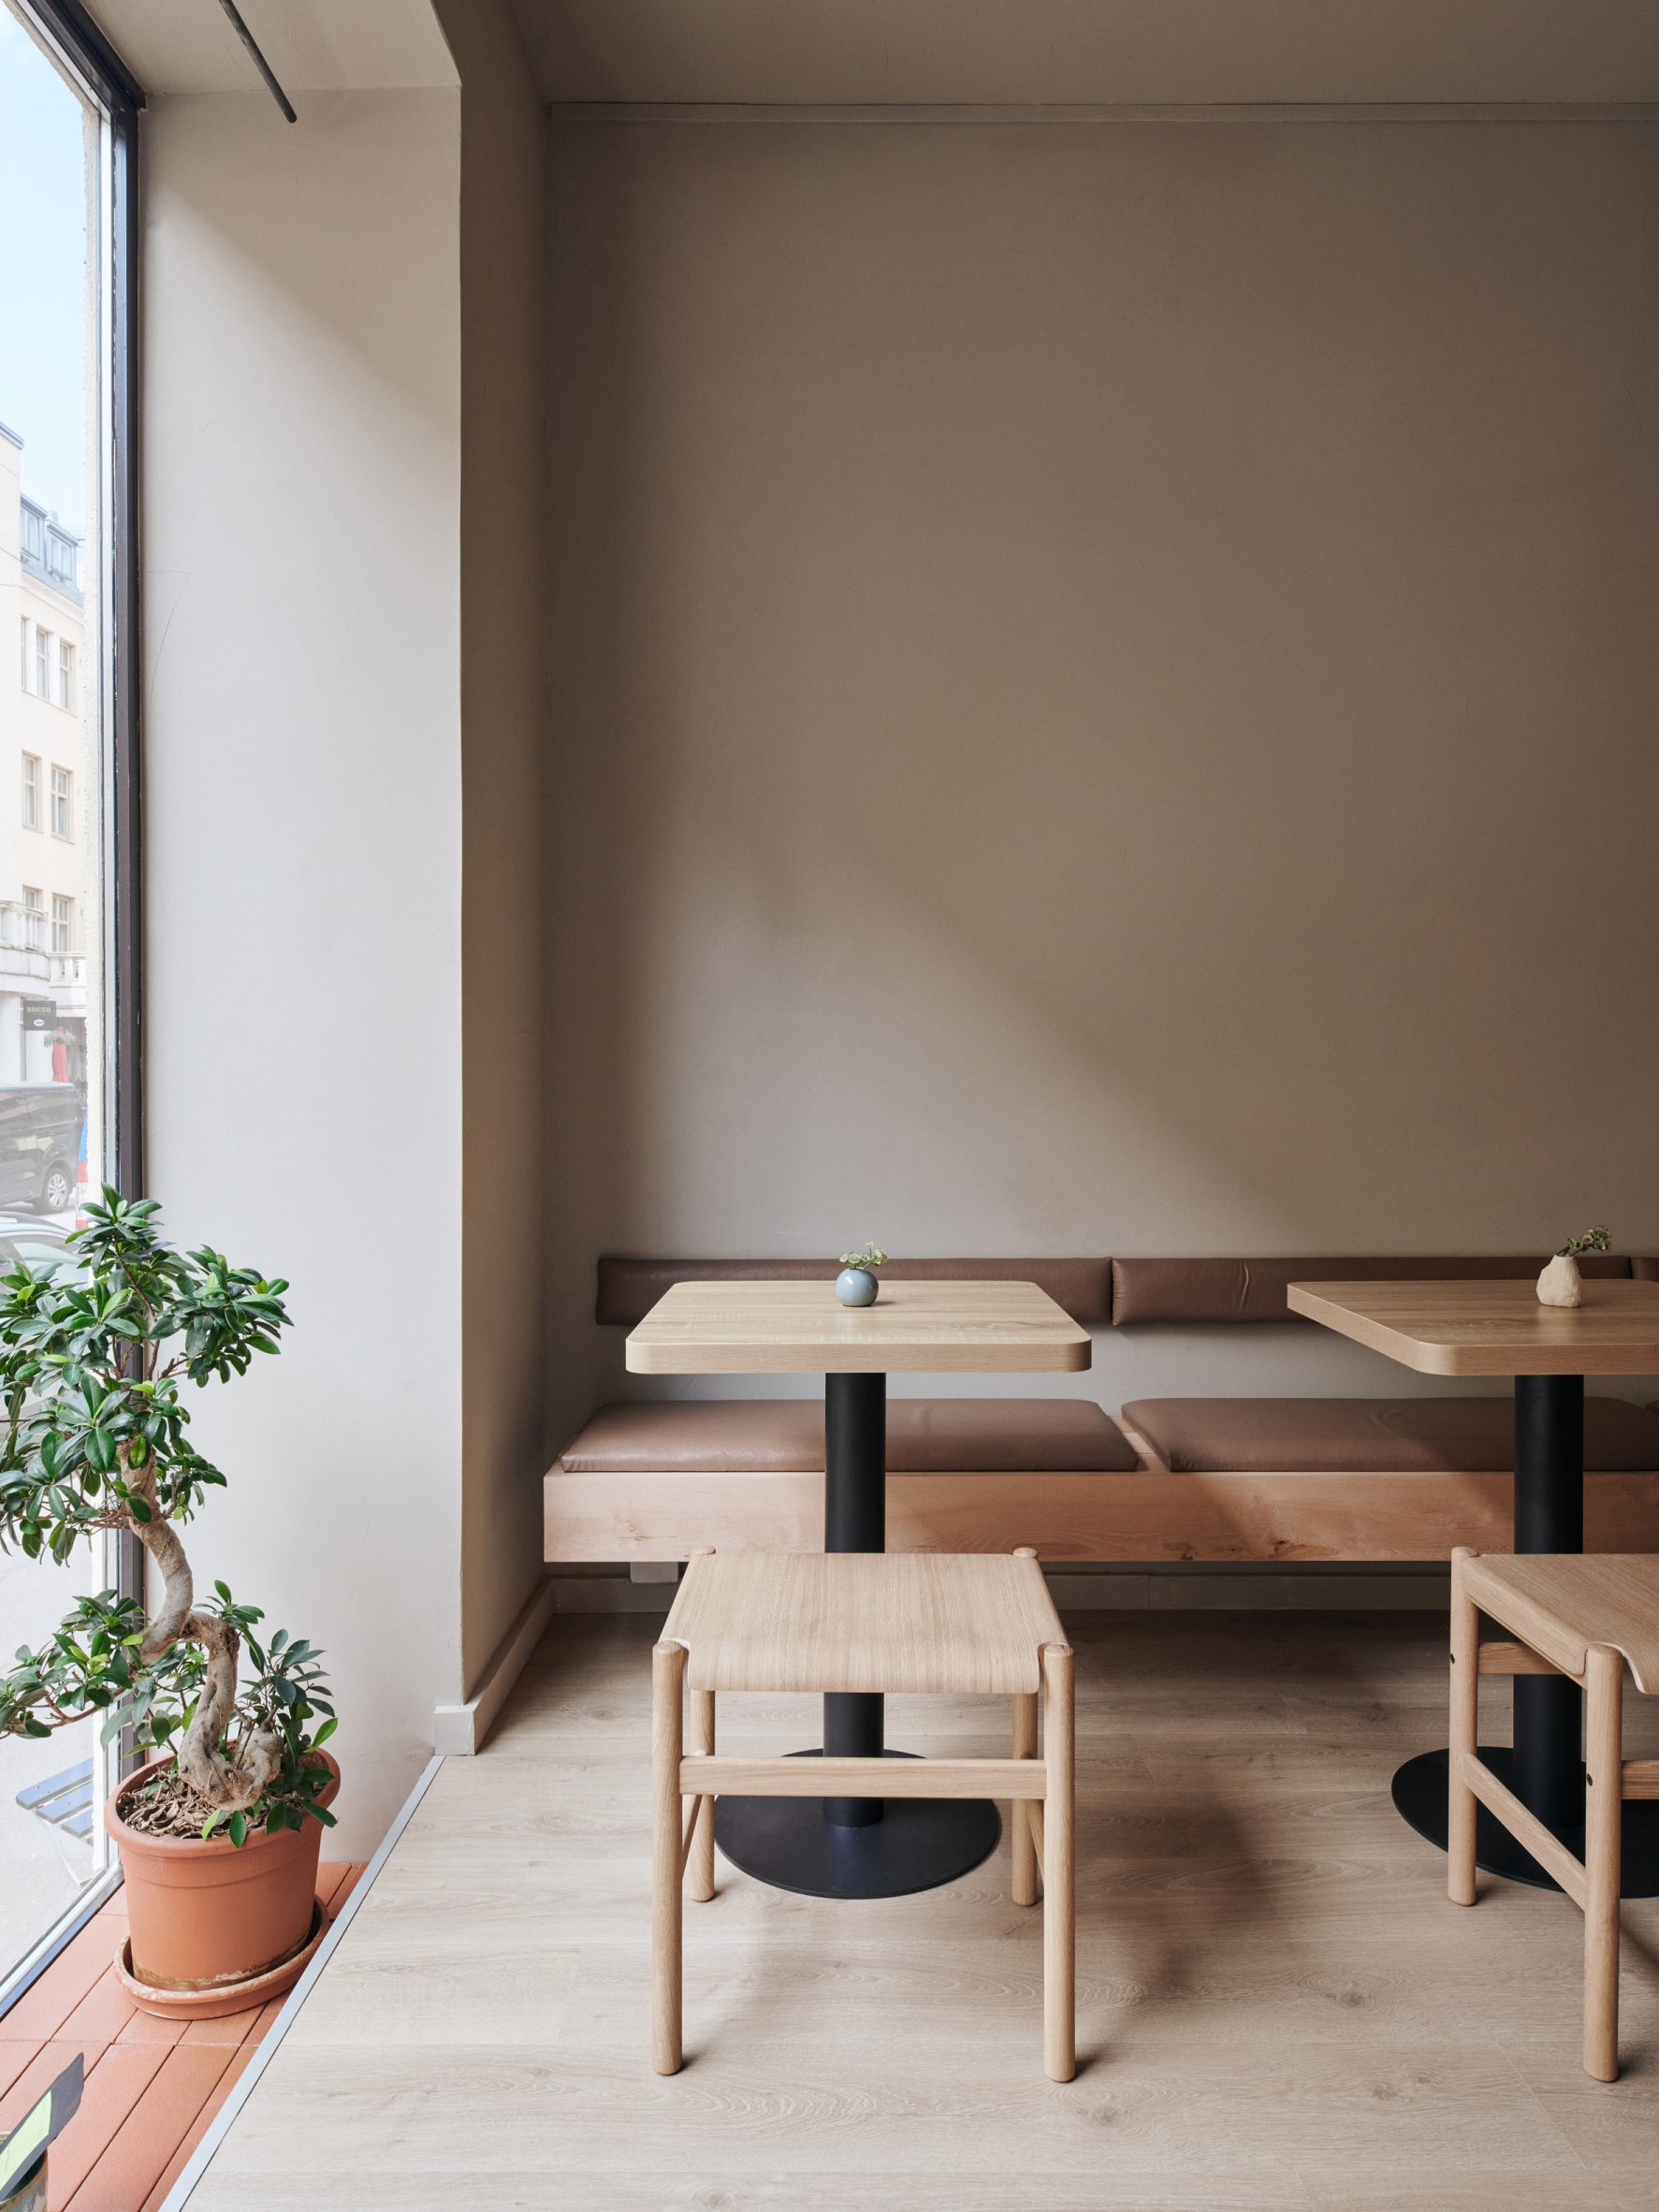 Seating area of teahouse designed by Yatofu with oak bench, table and low stool 